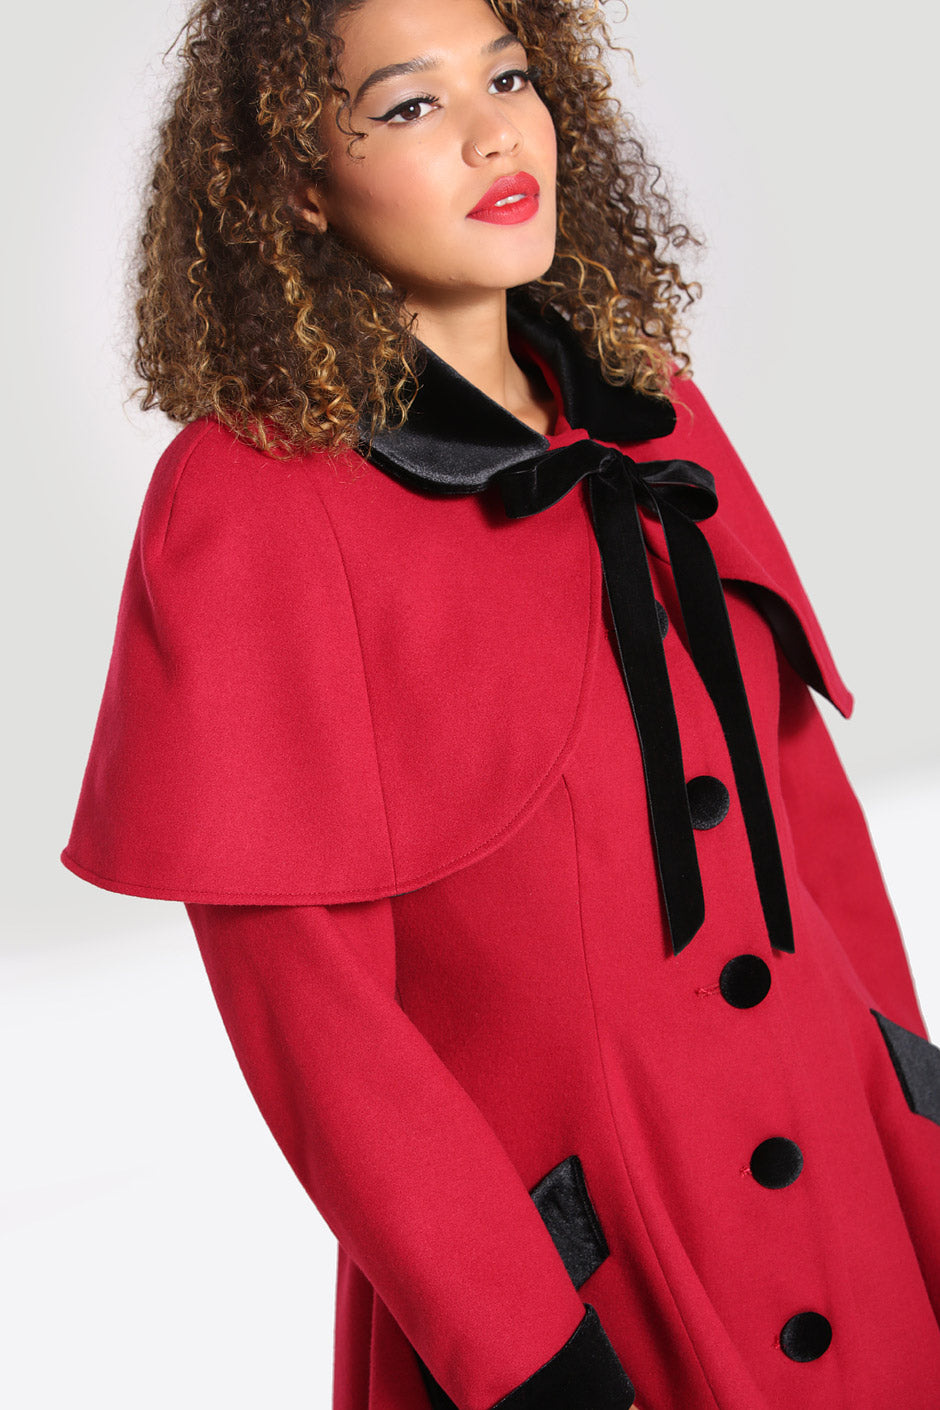 Vintage woman with brown eyes and red lipstick wearing a red coat with a shoulder cape